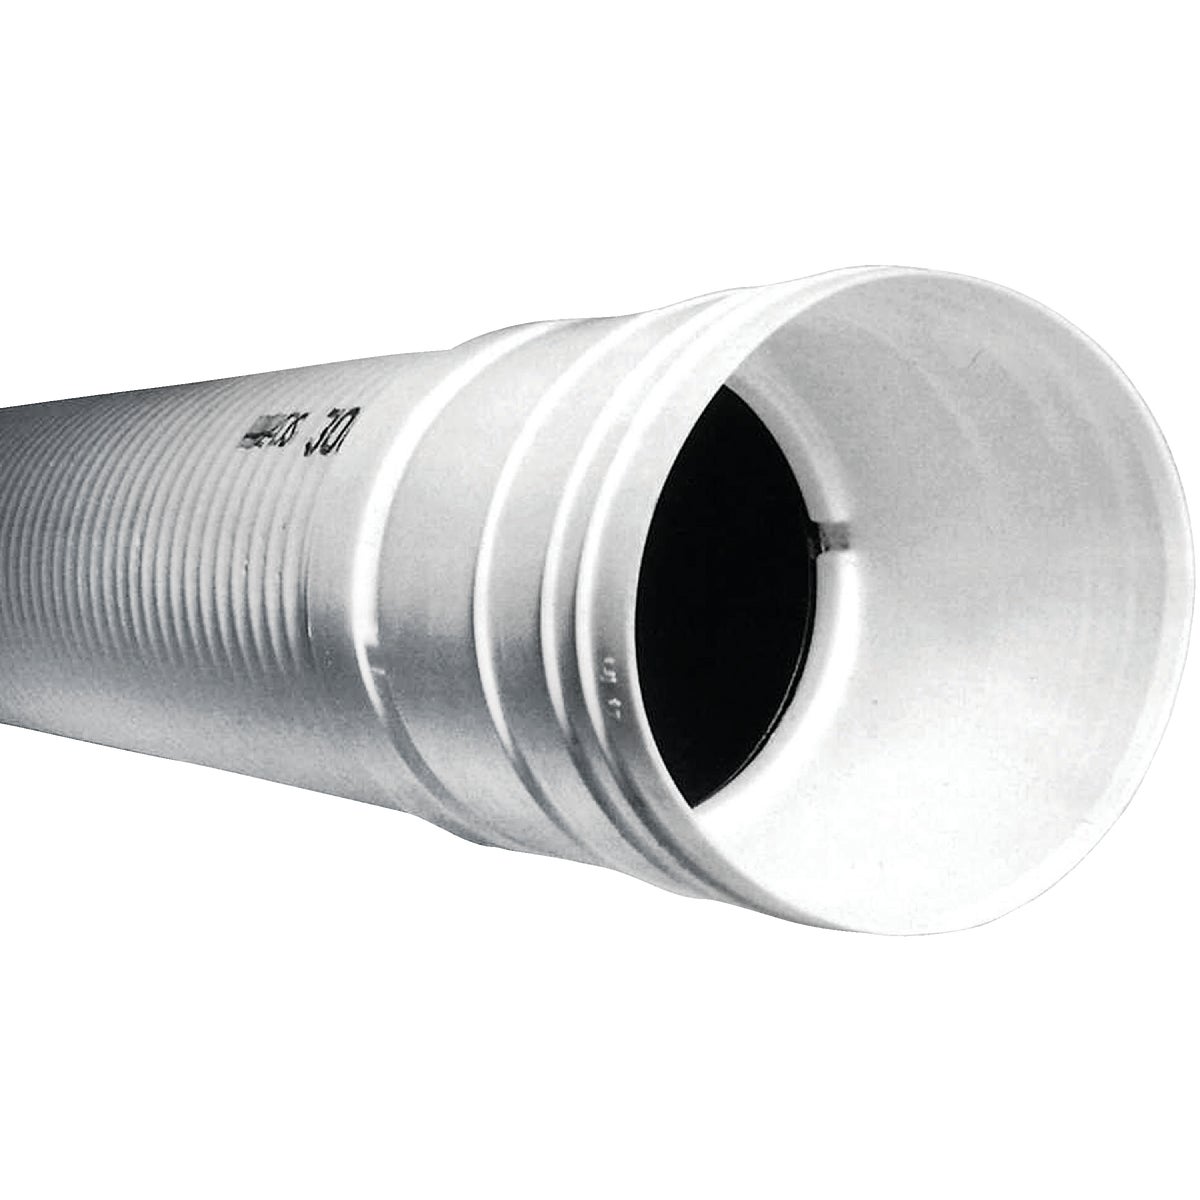 Advanced Drainage Systems 4 In. X 10 Ft. HDPE Solid Sewage & Drainage Pipe